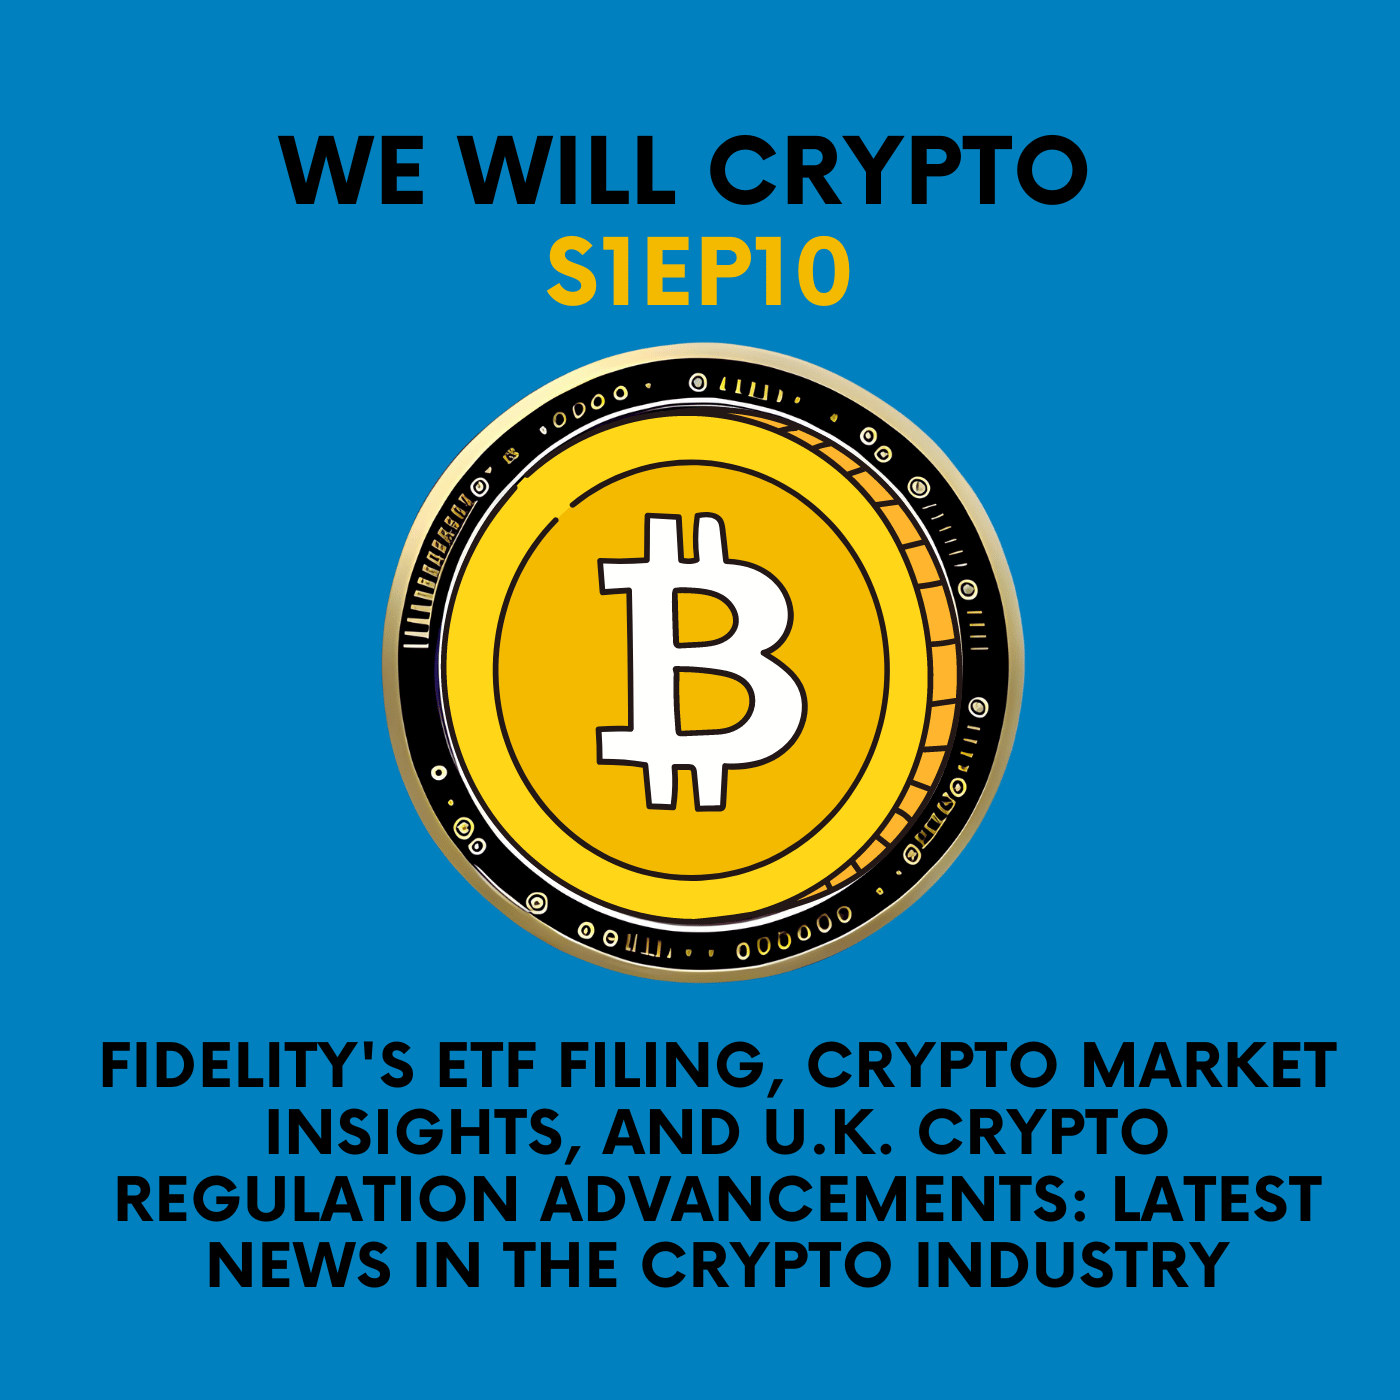 Fidelity’s ETF Filing, Crypto Market Insights, and U.K. Crypto Regulation Advancements: Latest News in the Crypto Industry post thumbnail image